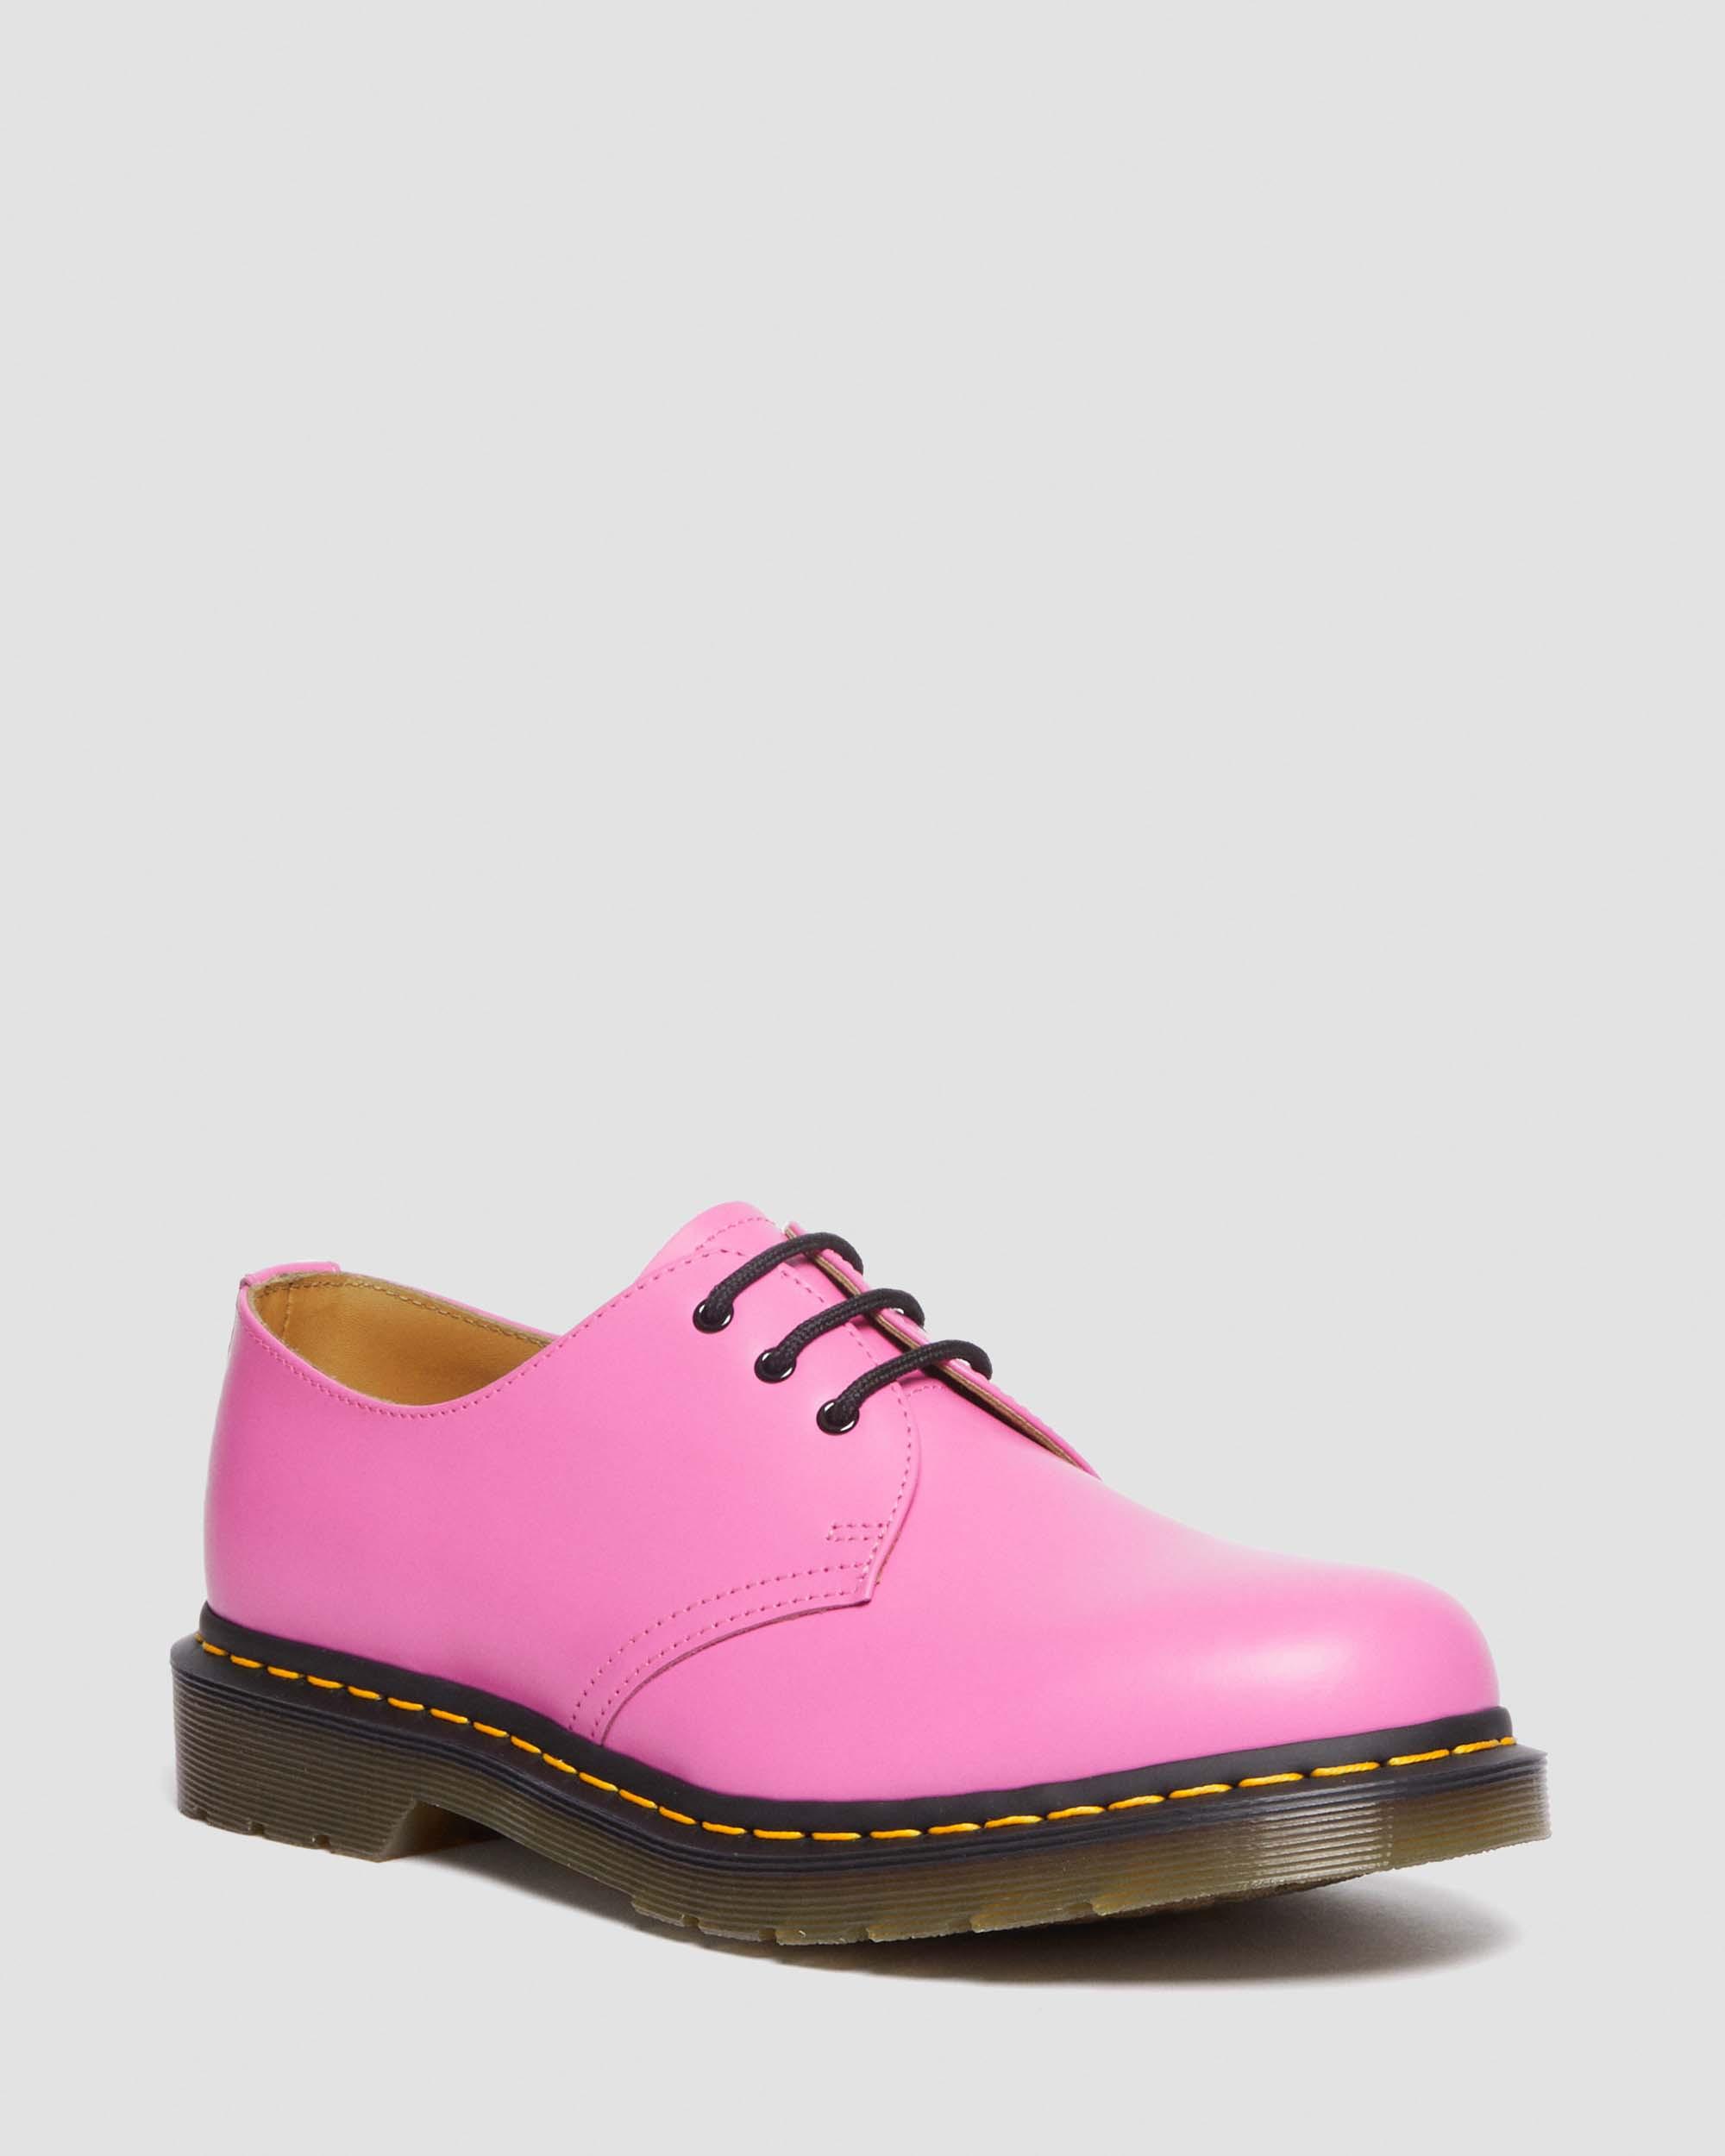 1461 Oxford Shoes | 3 Eye Shoes | Dr. Martens